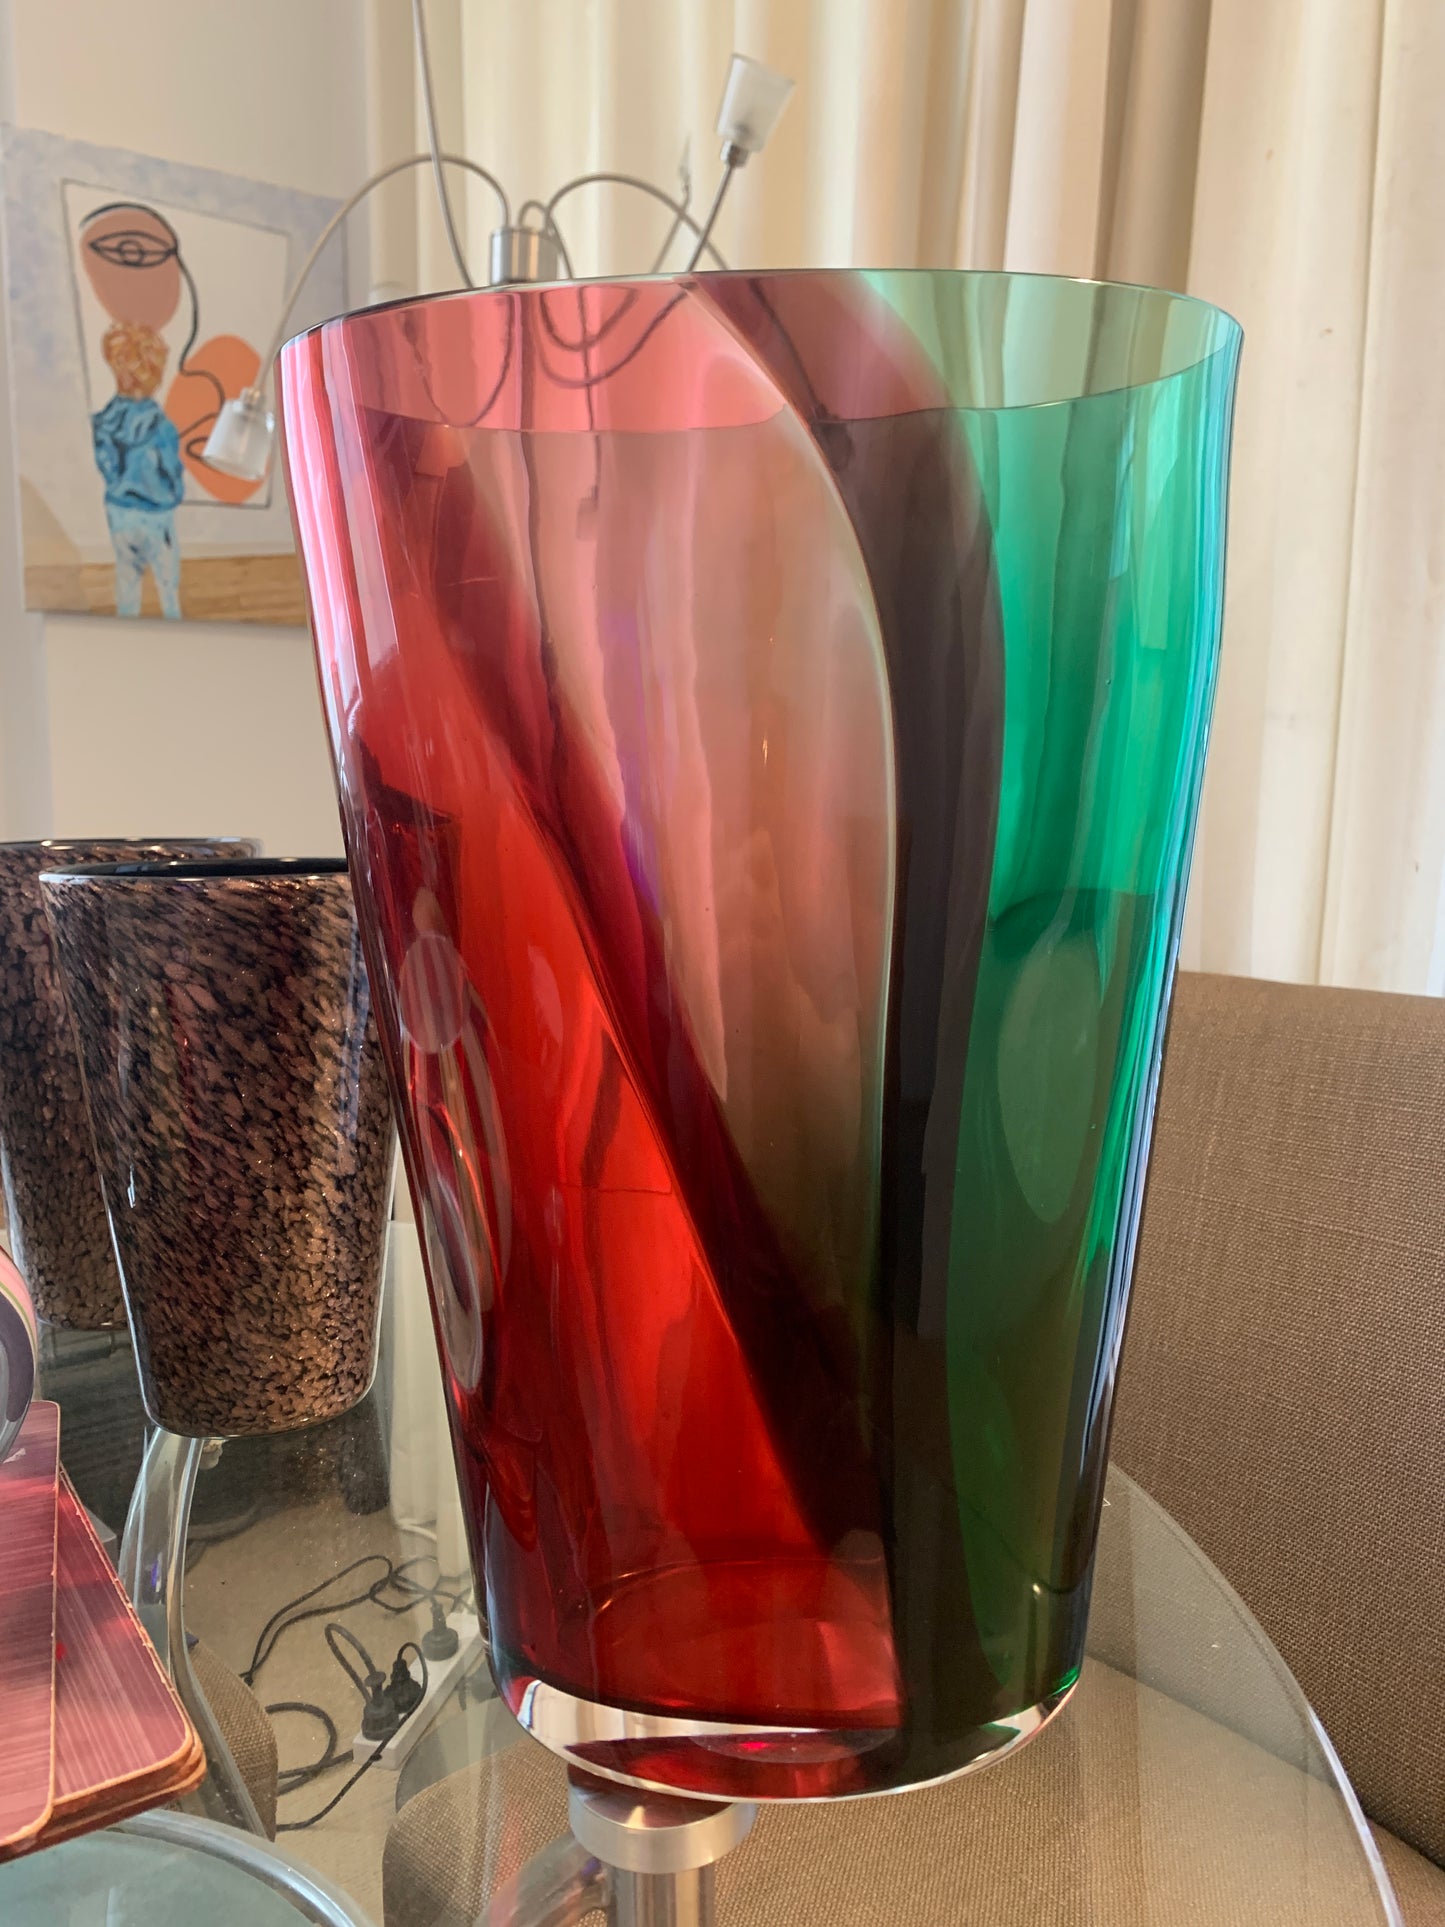 Archimede Seguso (1942-1999), Murano, Italy - X-Large Signed Carnivale Pink and Green Vase - 39.5cm